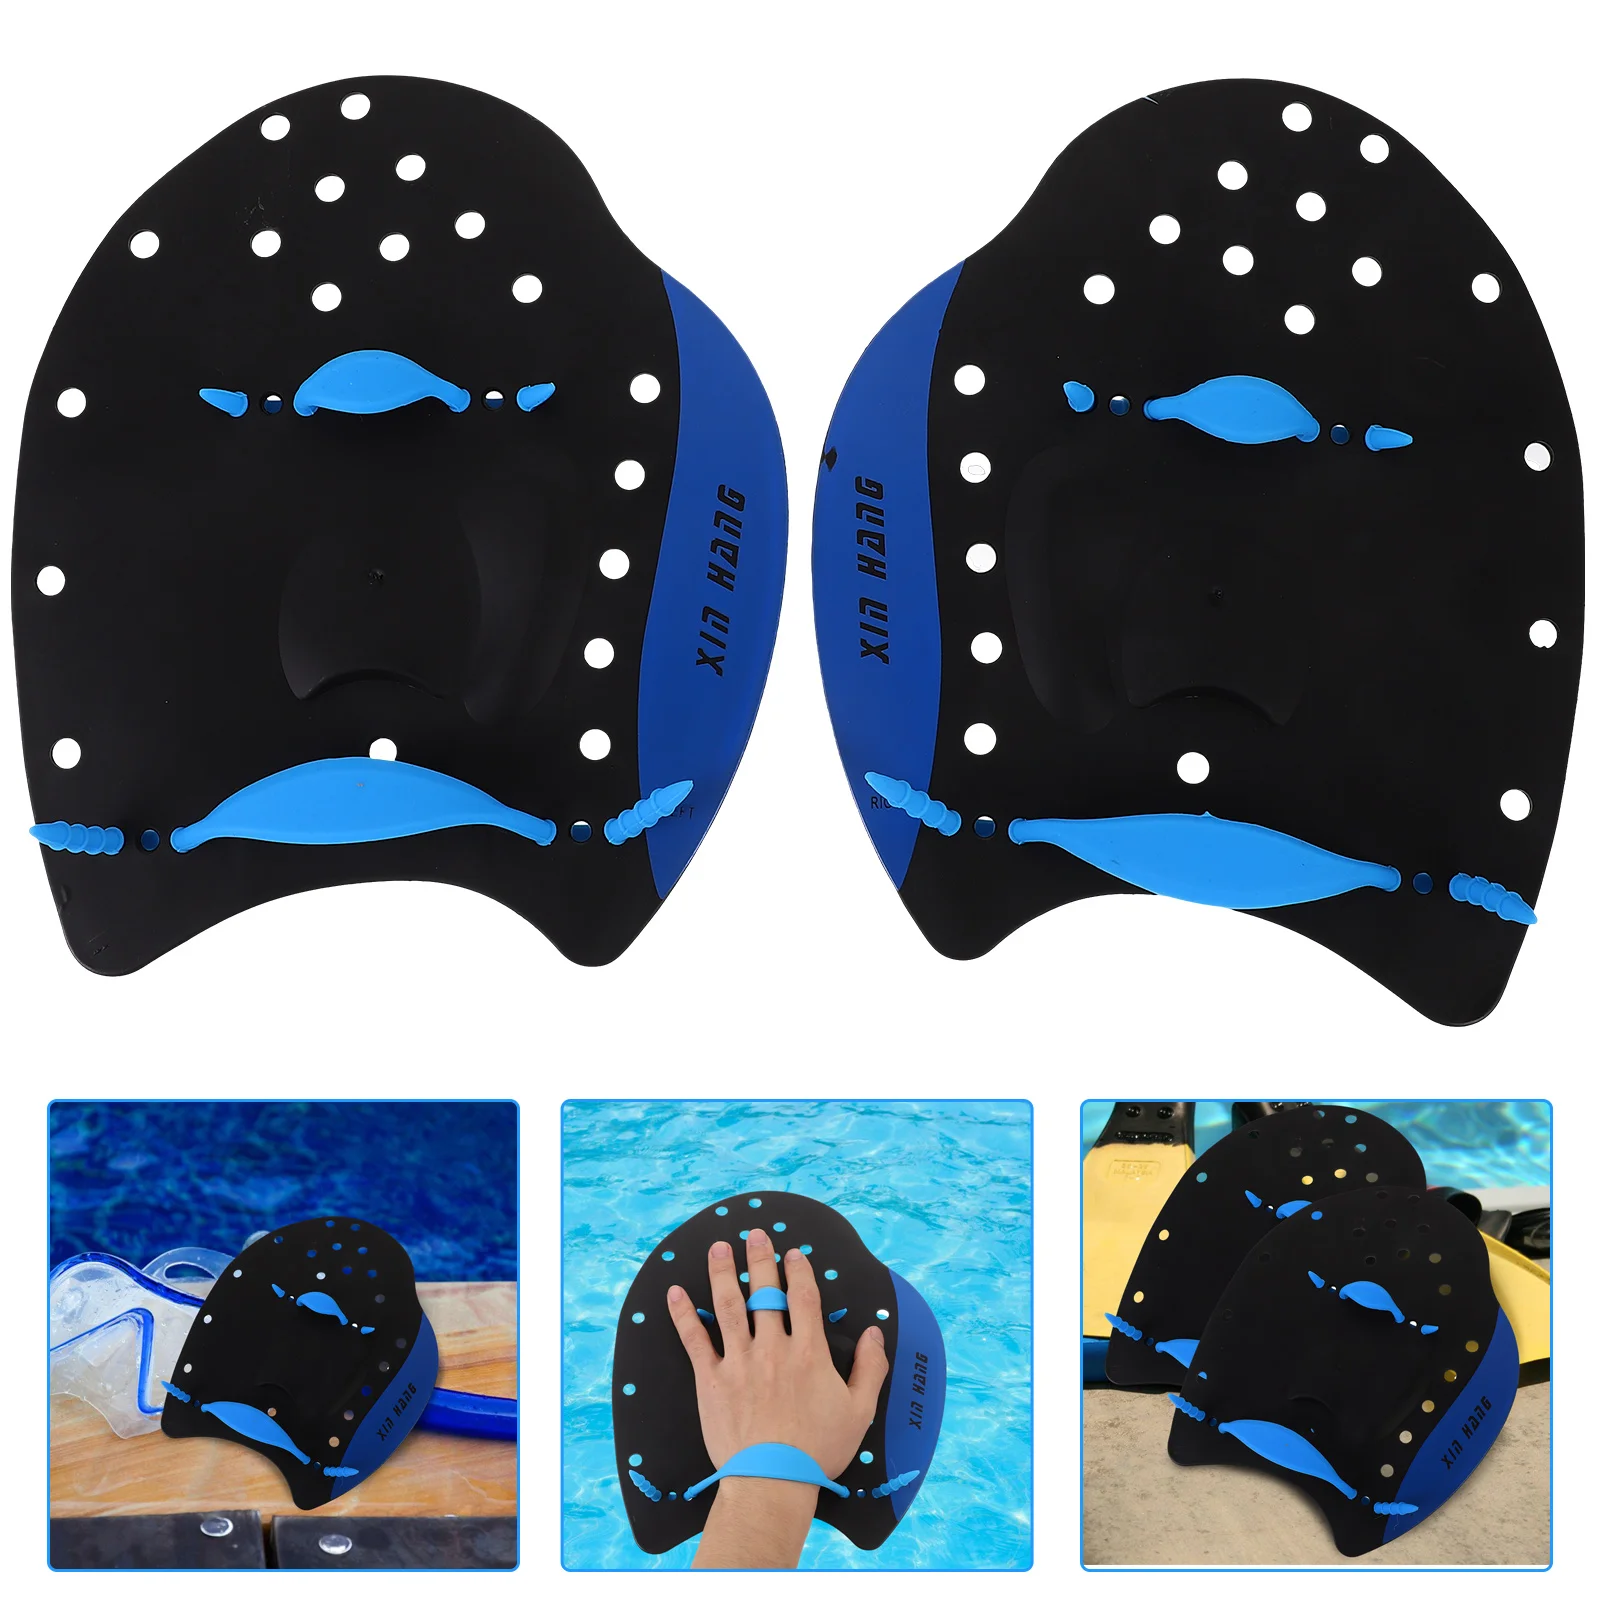 1 Pair Gloves For Kids Hand Swimming Training Tool Hand Paddles with Adjustable Straps Hand Paddles for Beginners and Men Size solo sp 140 piano finger trainers fingers strength training tools finger correctors for piano beginners 1 pair pack